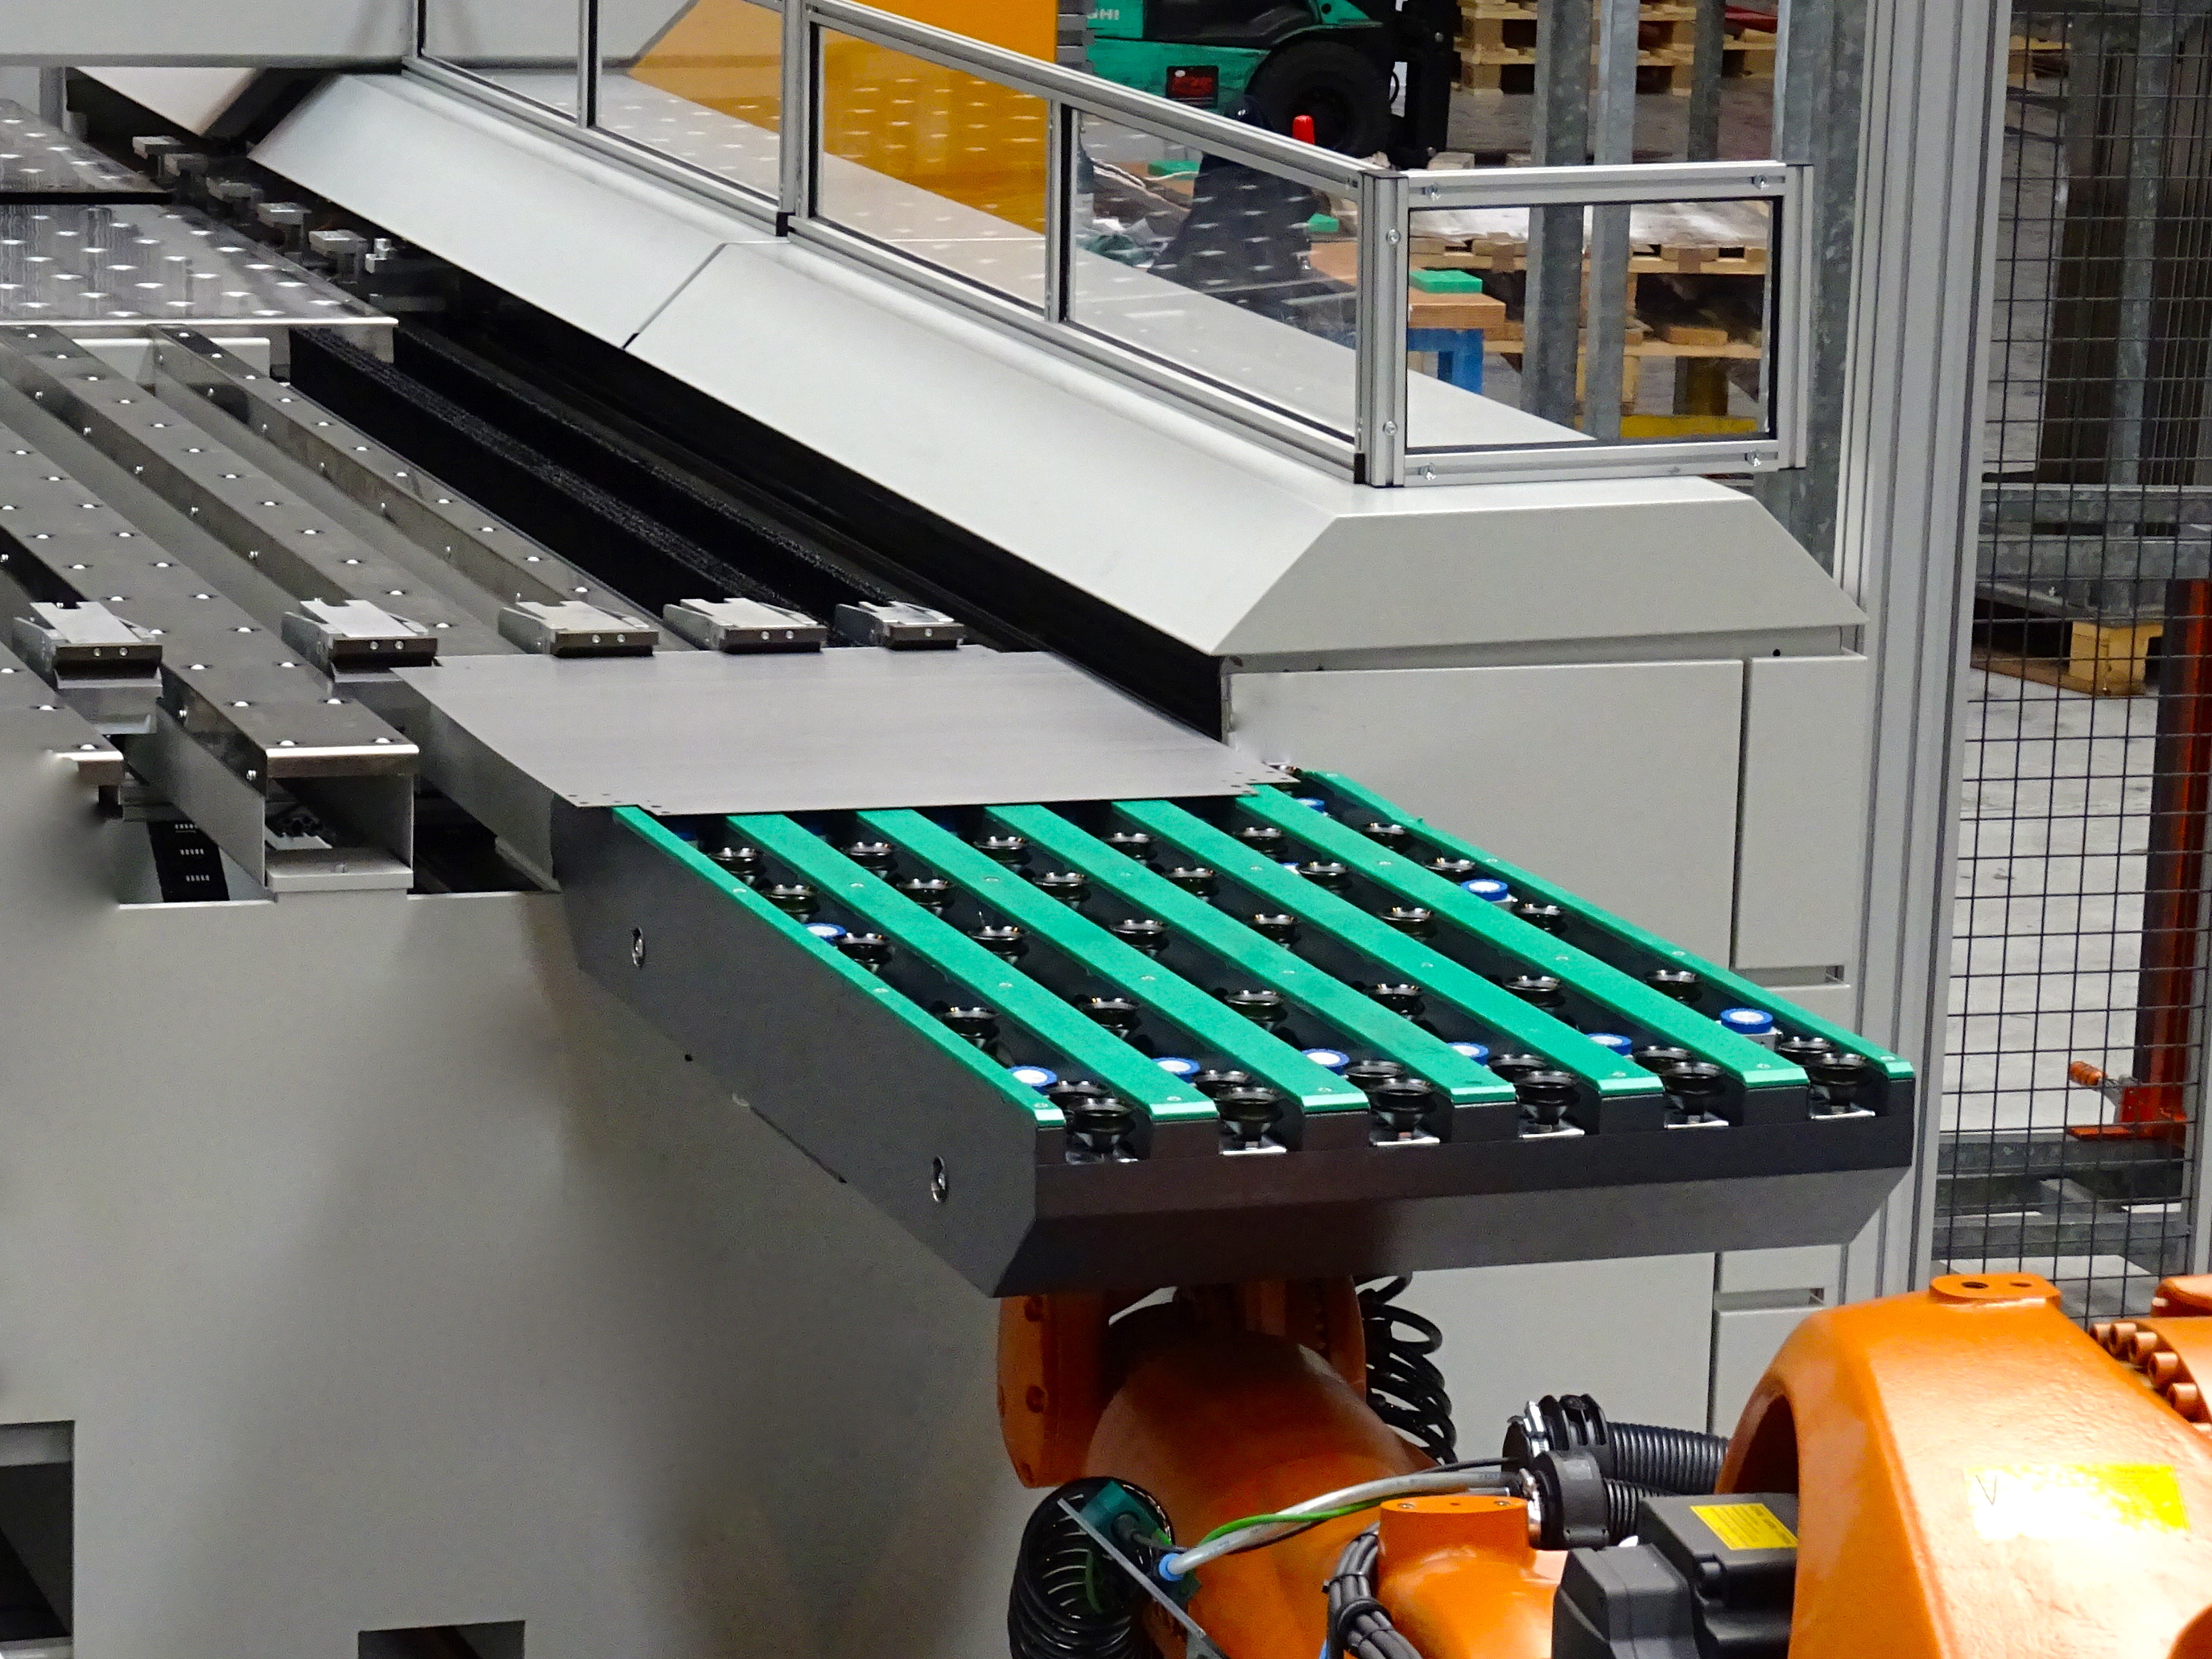 The intelligent loading robot flips the blanks on request